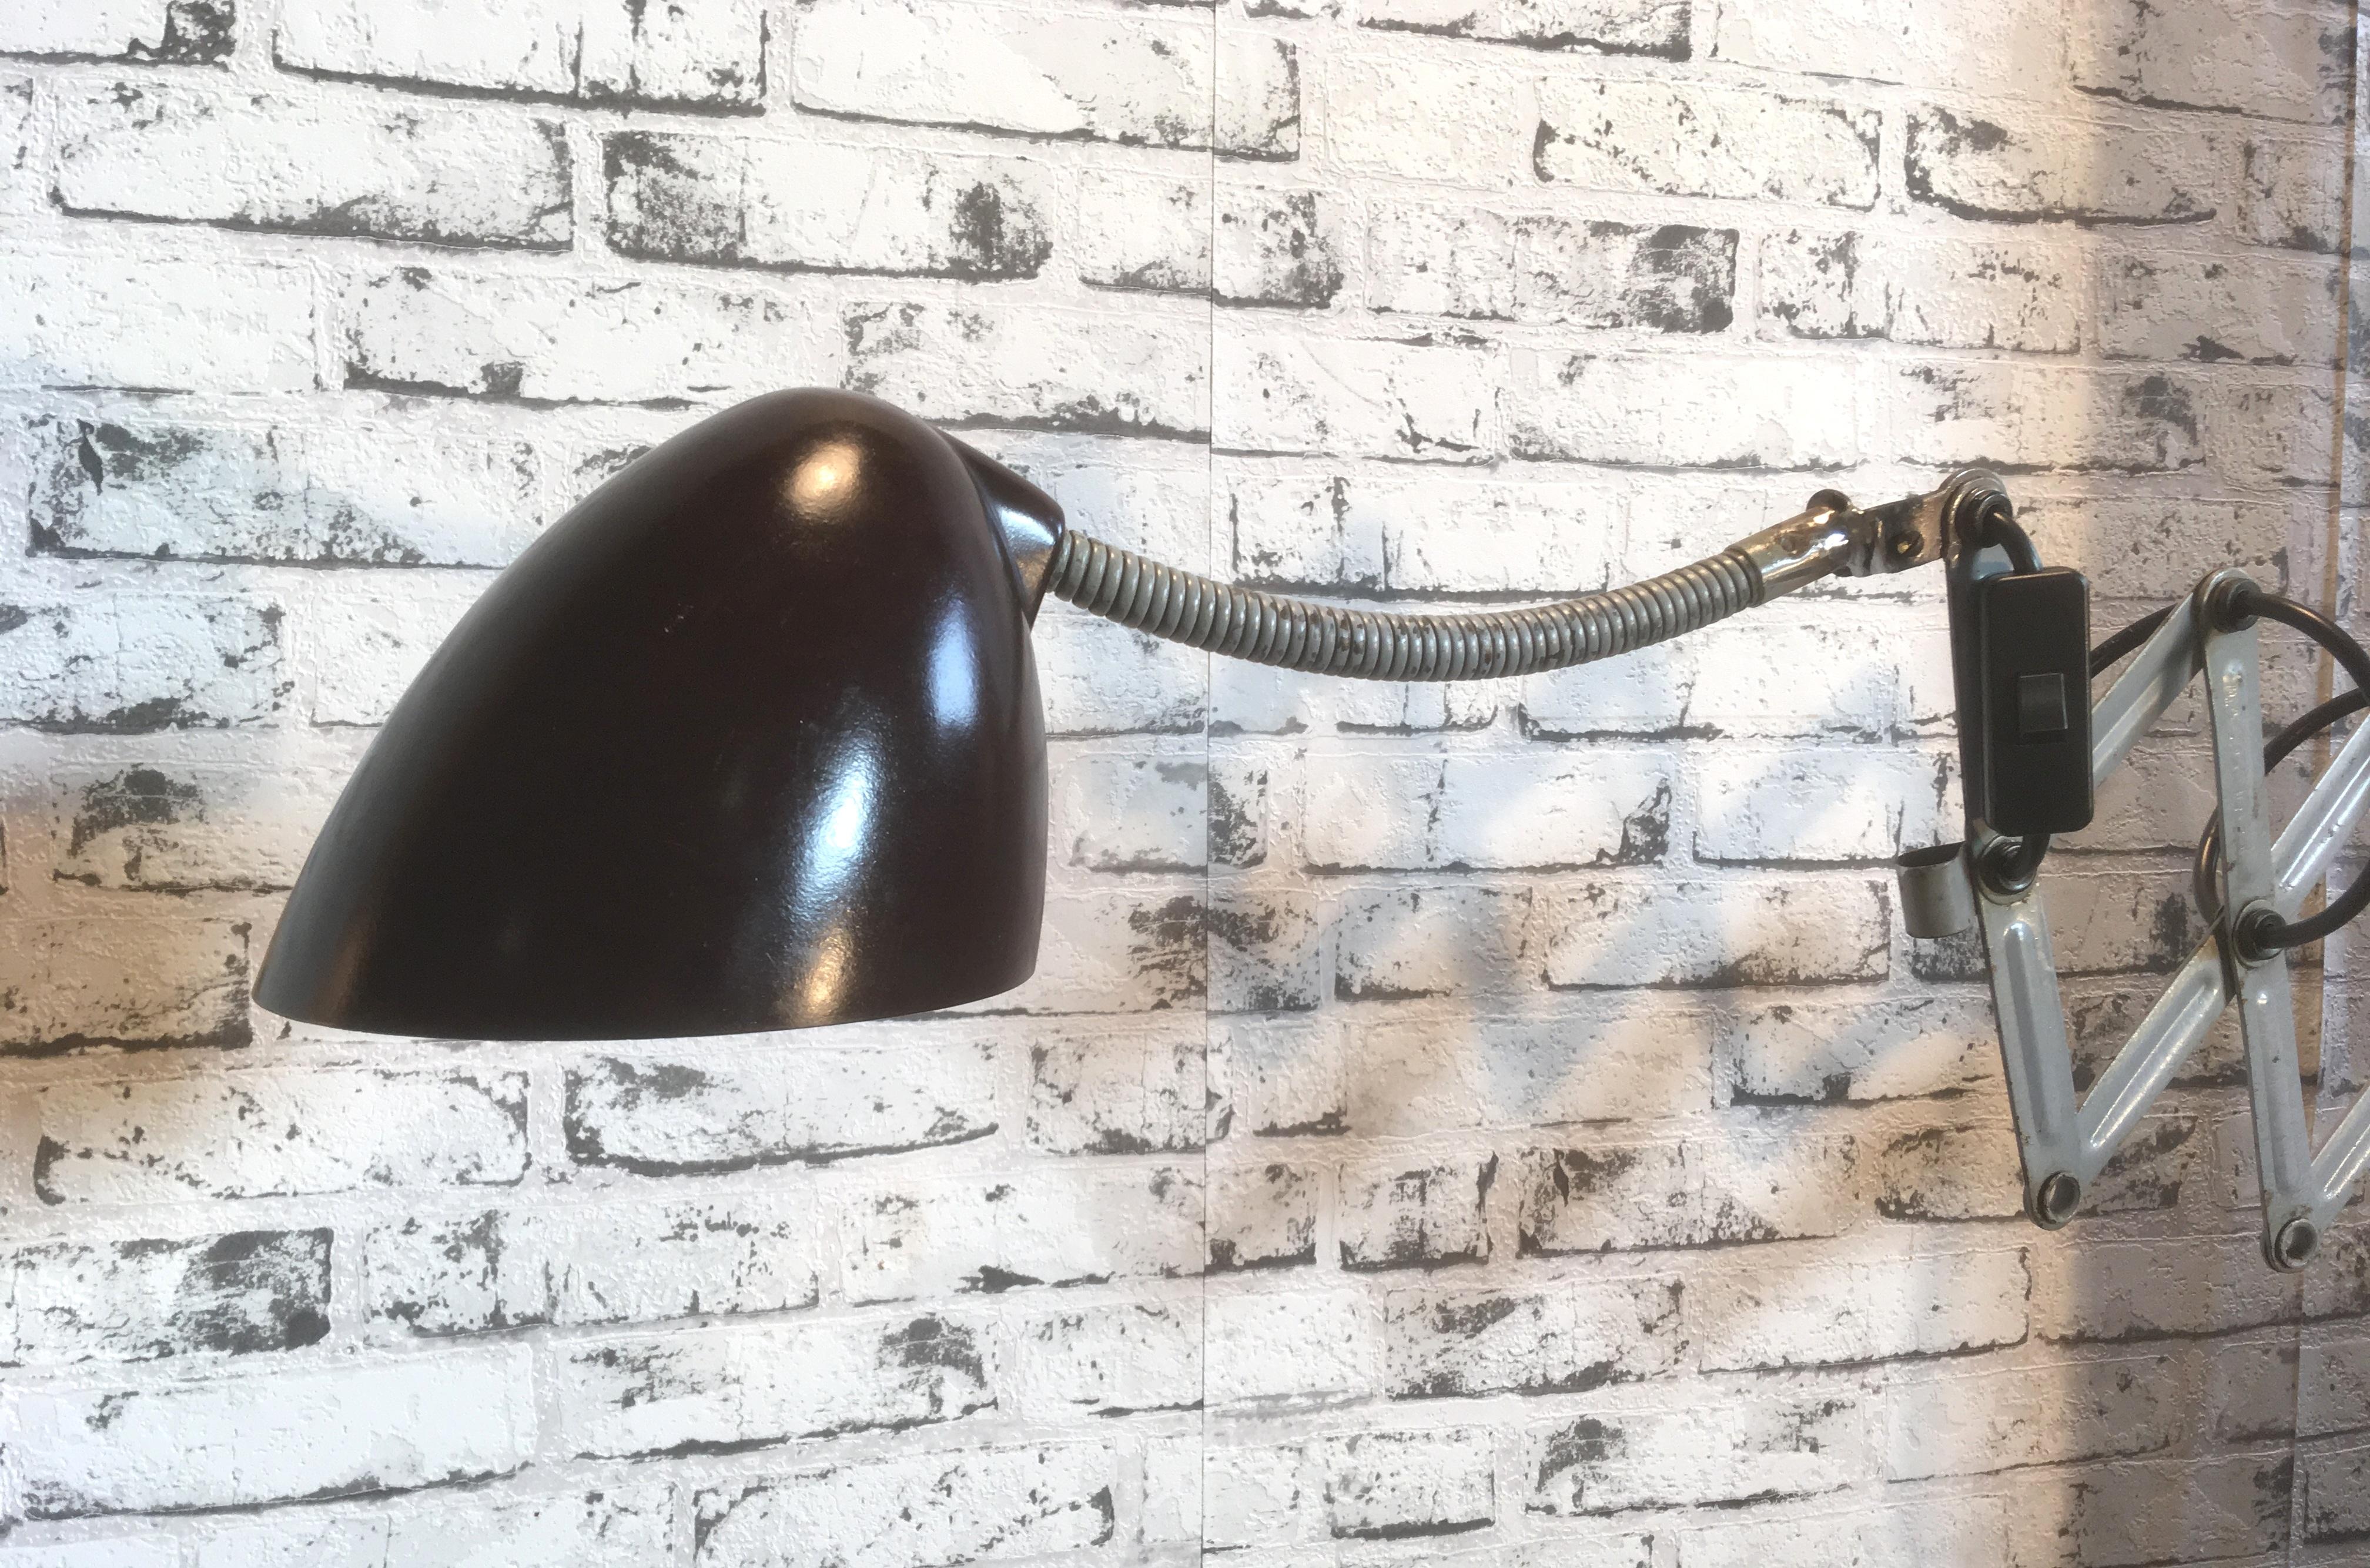 This vintage Industrial scissor lamp was produced by Elektroinstala in former Czechoslovakia in the 1960s. Lamp has brown Bakelite shade. Grey iron scissor arm is extendable and can be turned sideways. Original socket for E 27 bulbs. Fully